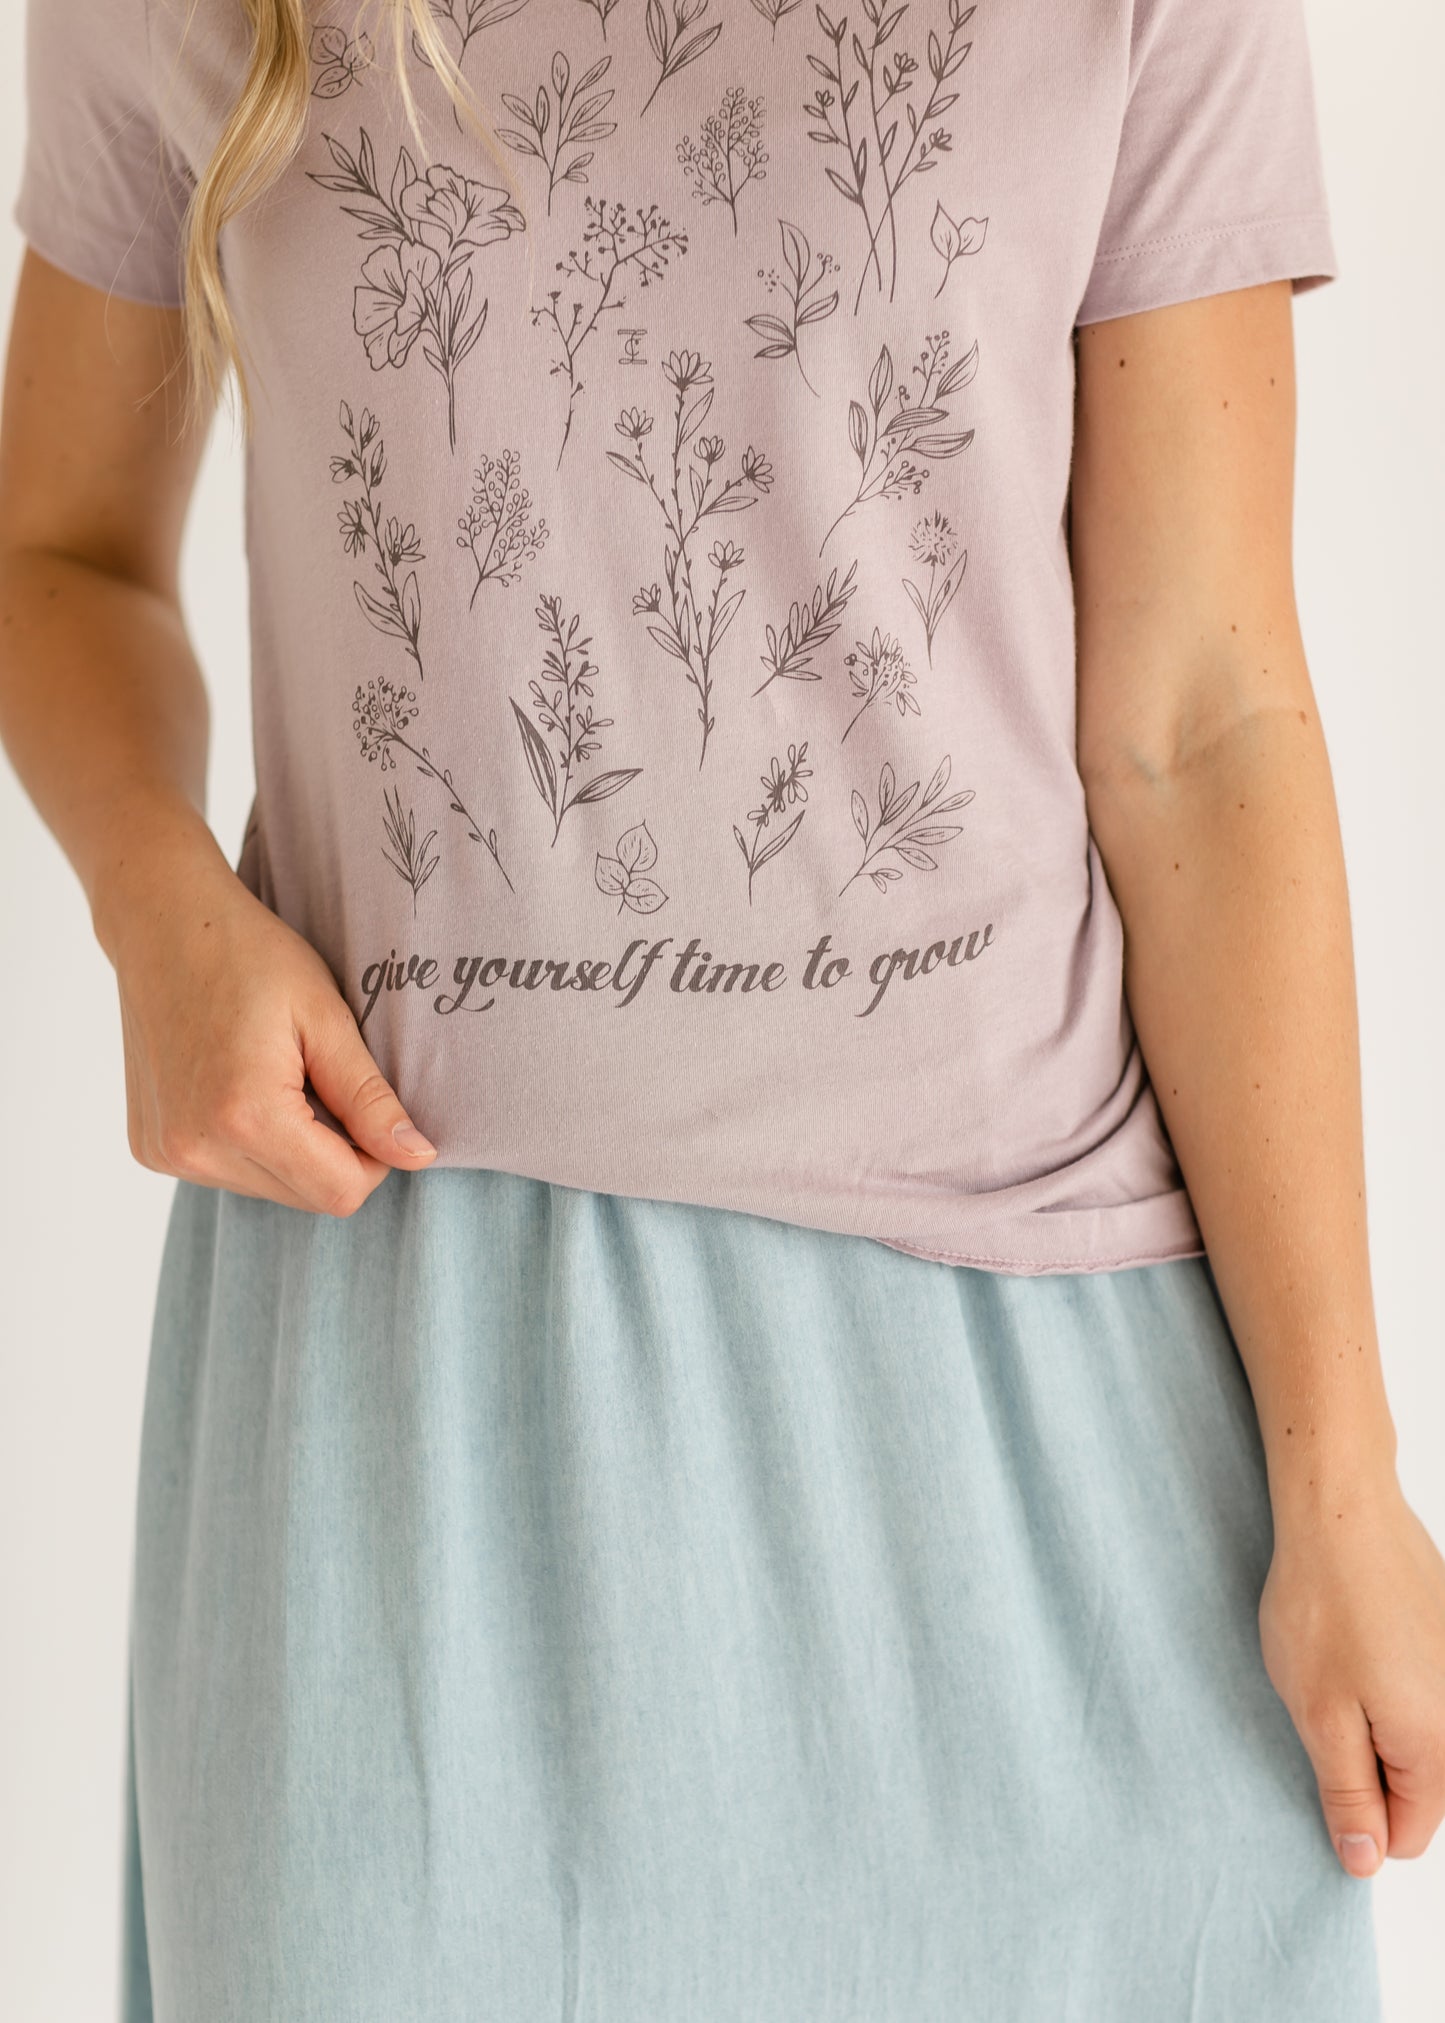 Inherit Floral Violet “give yourself time to grow” Tee